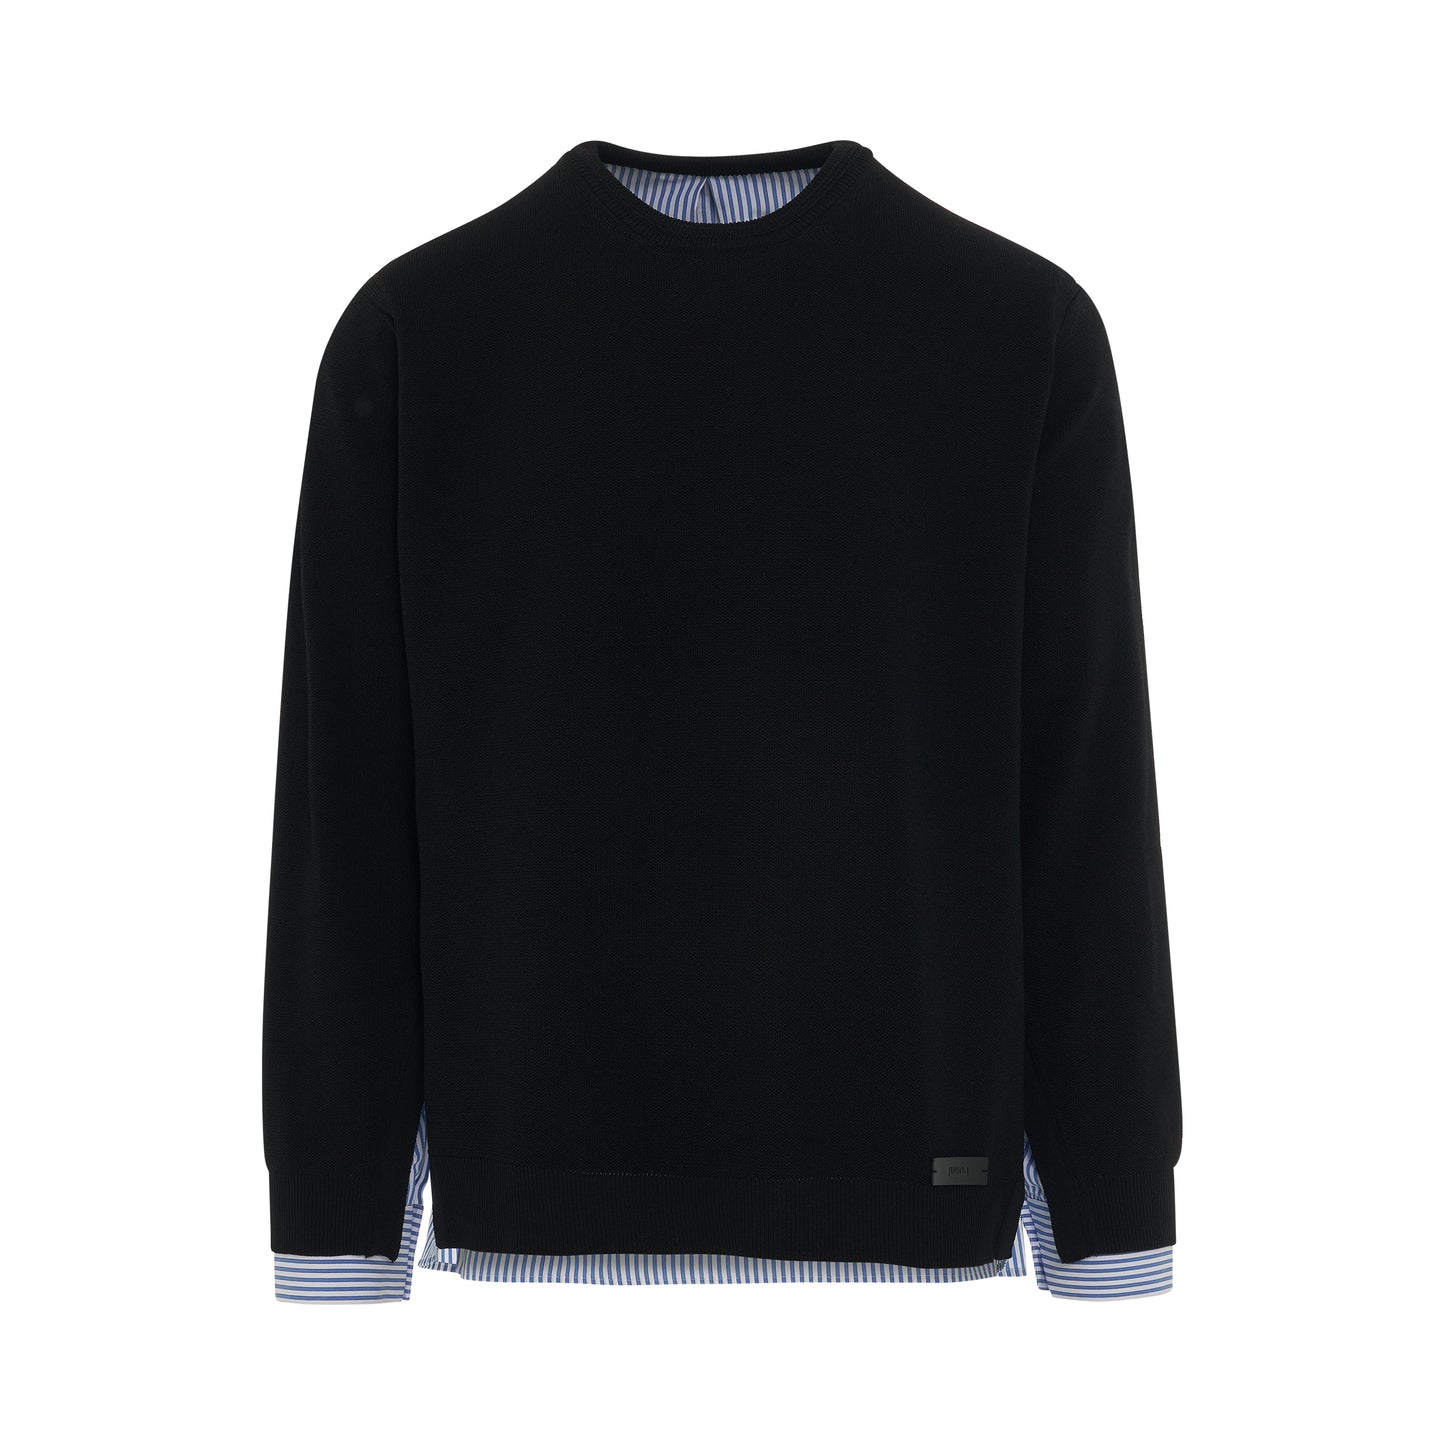 Woven Patched Round Sweater in Black